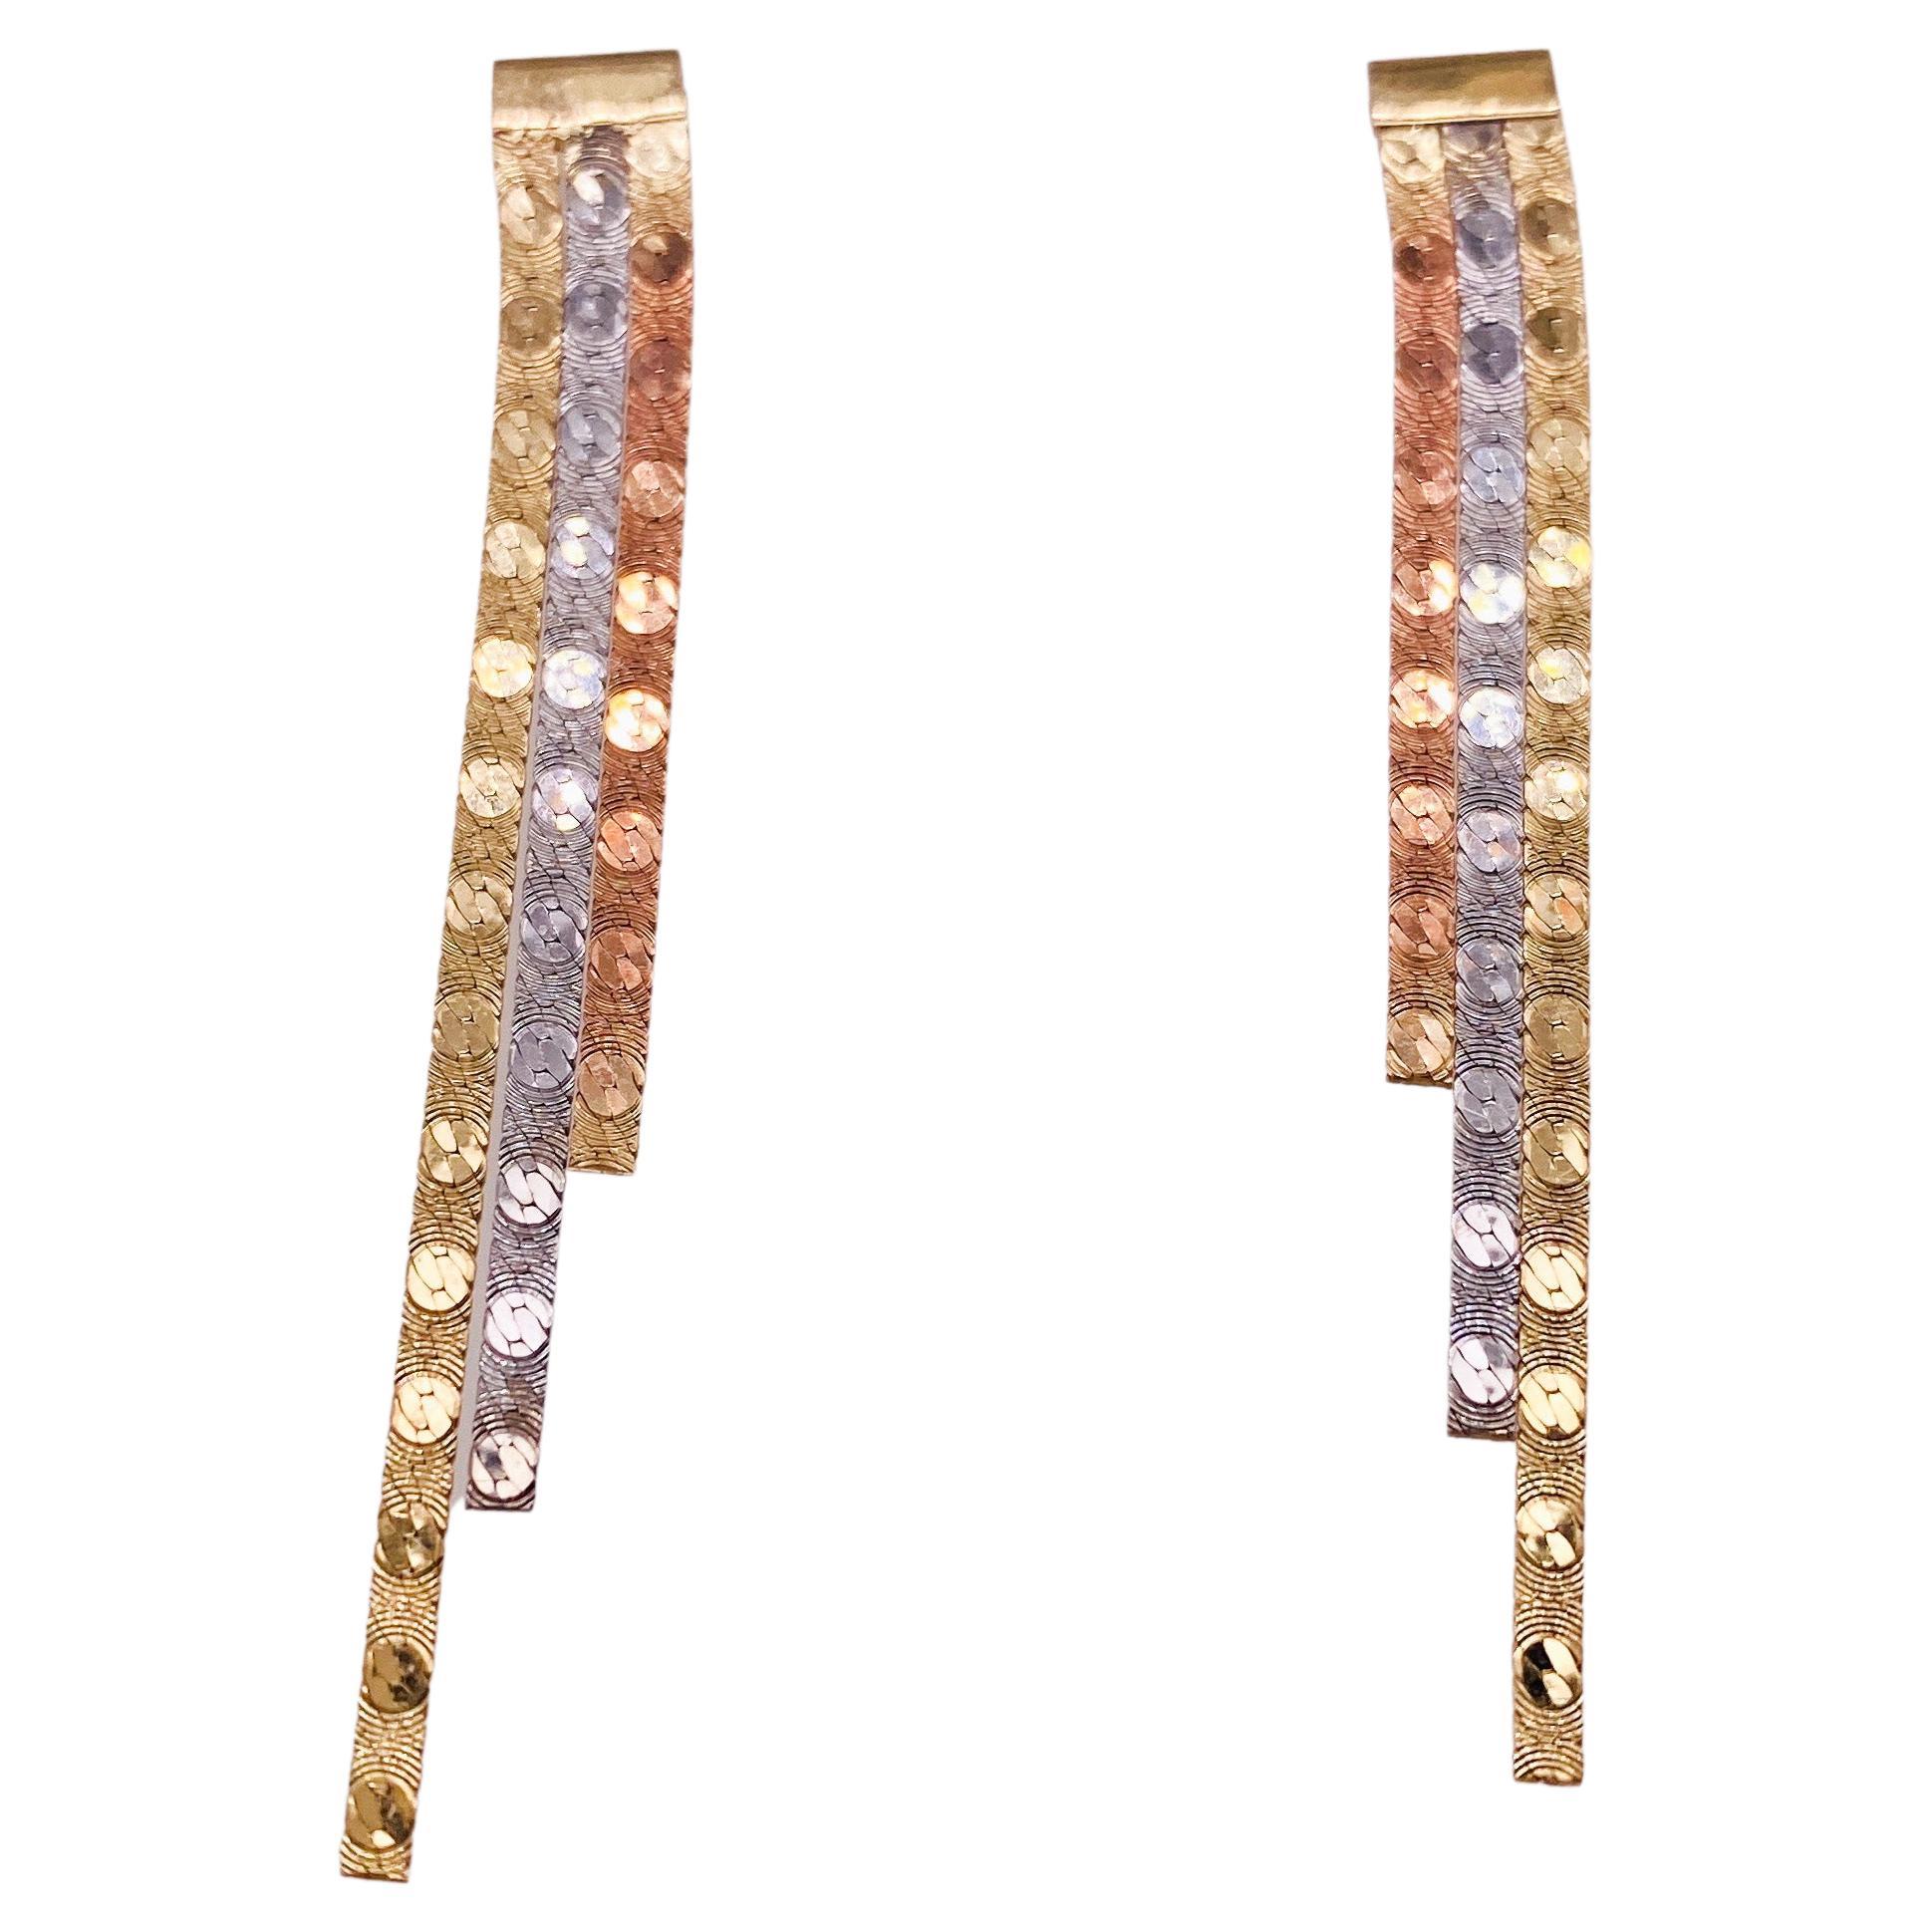 Mixed Metal Earrings Tri-Color Herringbone Drops 1.25-2 Inches 14K Gold Chains